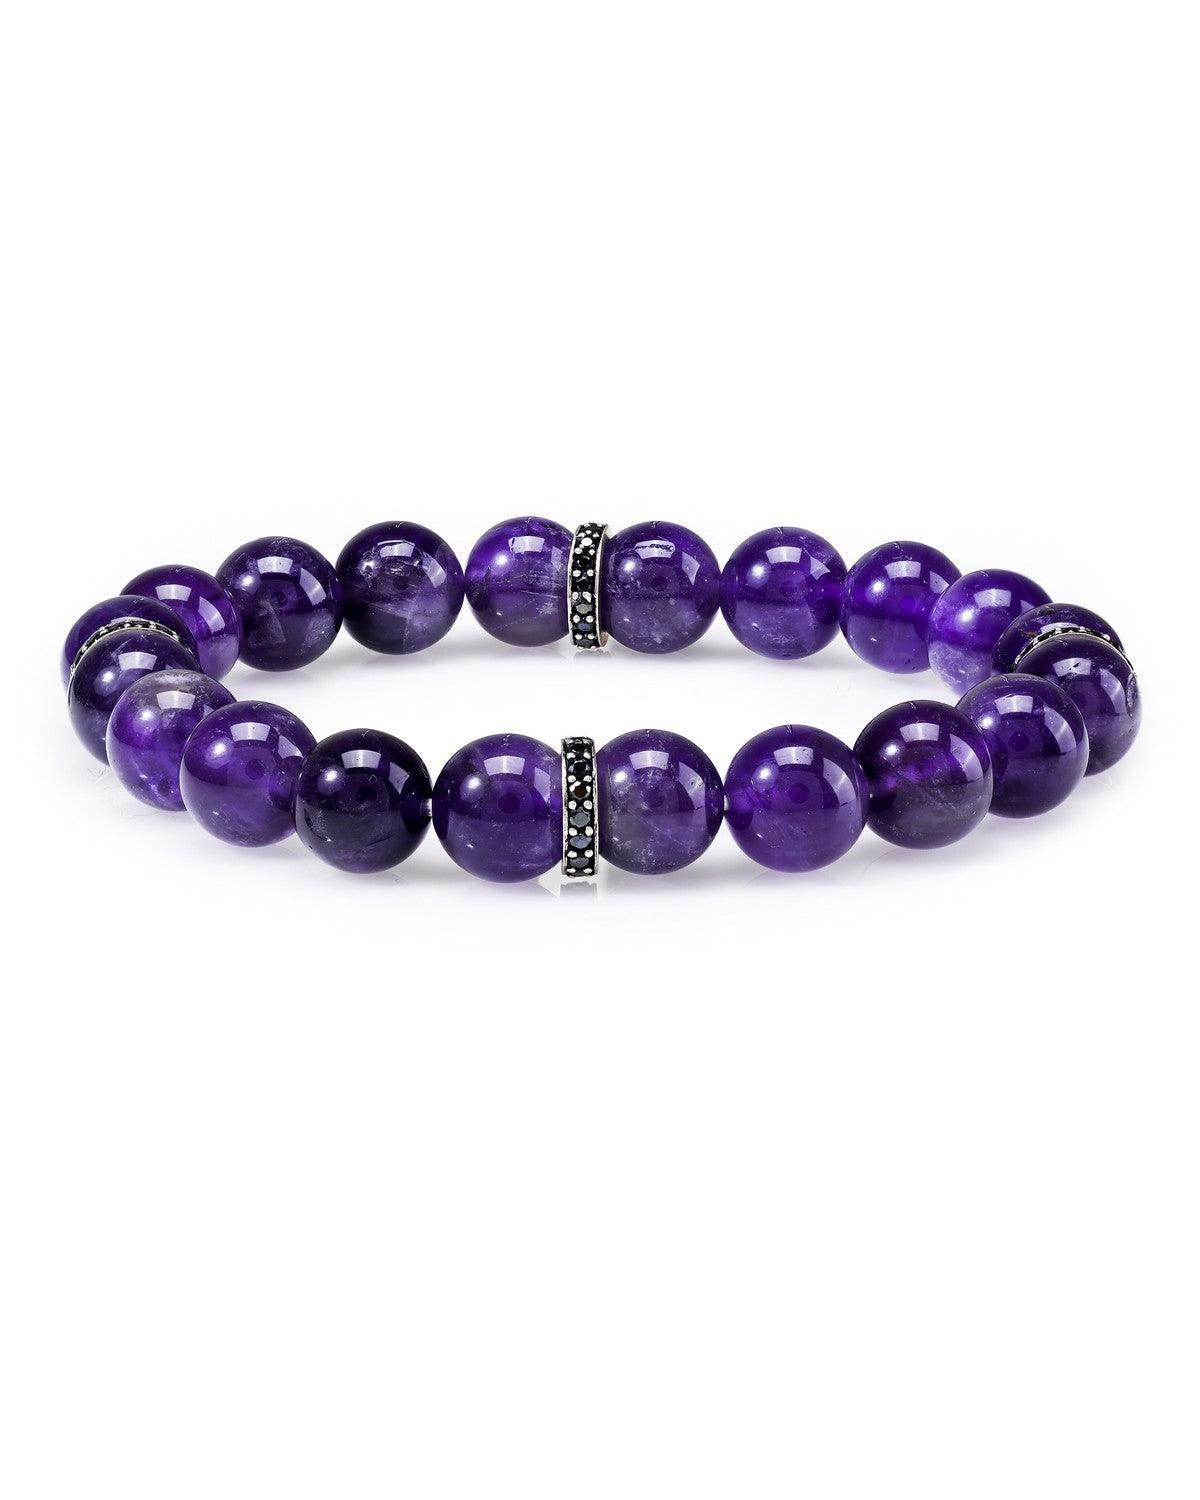 Amethyst Black Spinel 925 Sterling Silver Stretchable Beads Bracelet 7" For Men's Jewelry - YoTreasure